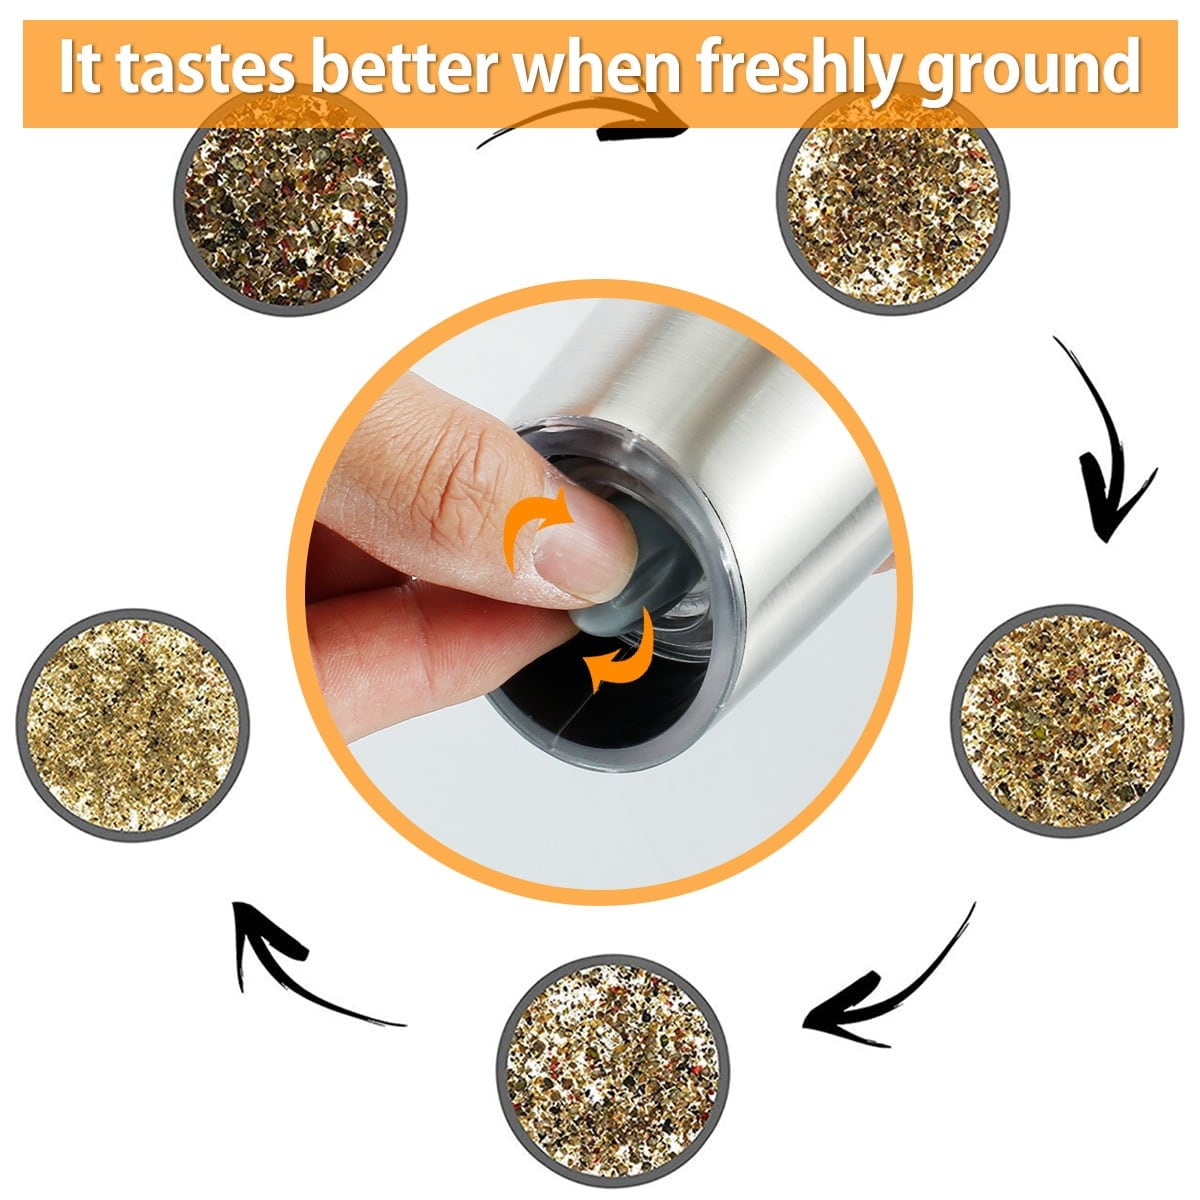 https://ak1.ostkcdn.com/images/products/is/images/direct/65cd995149c4eb89048c6ab5484dab3066227b99/Electric-salt-and-pepper-grinder.jpg